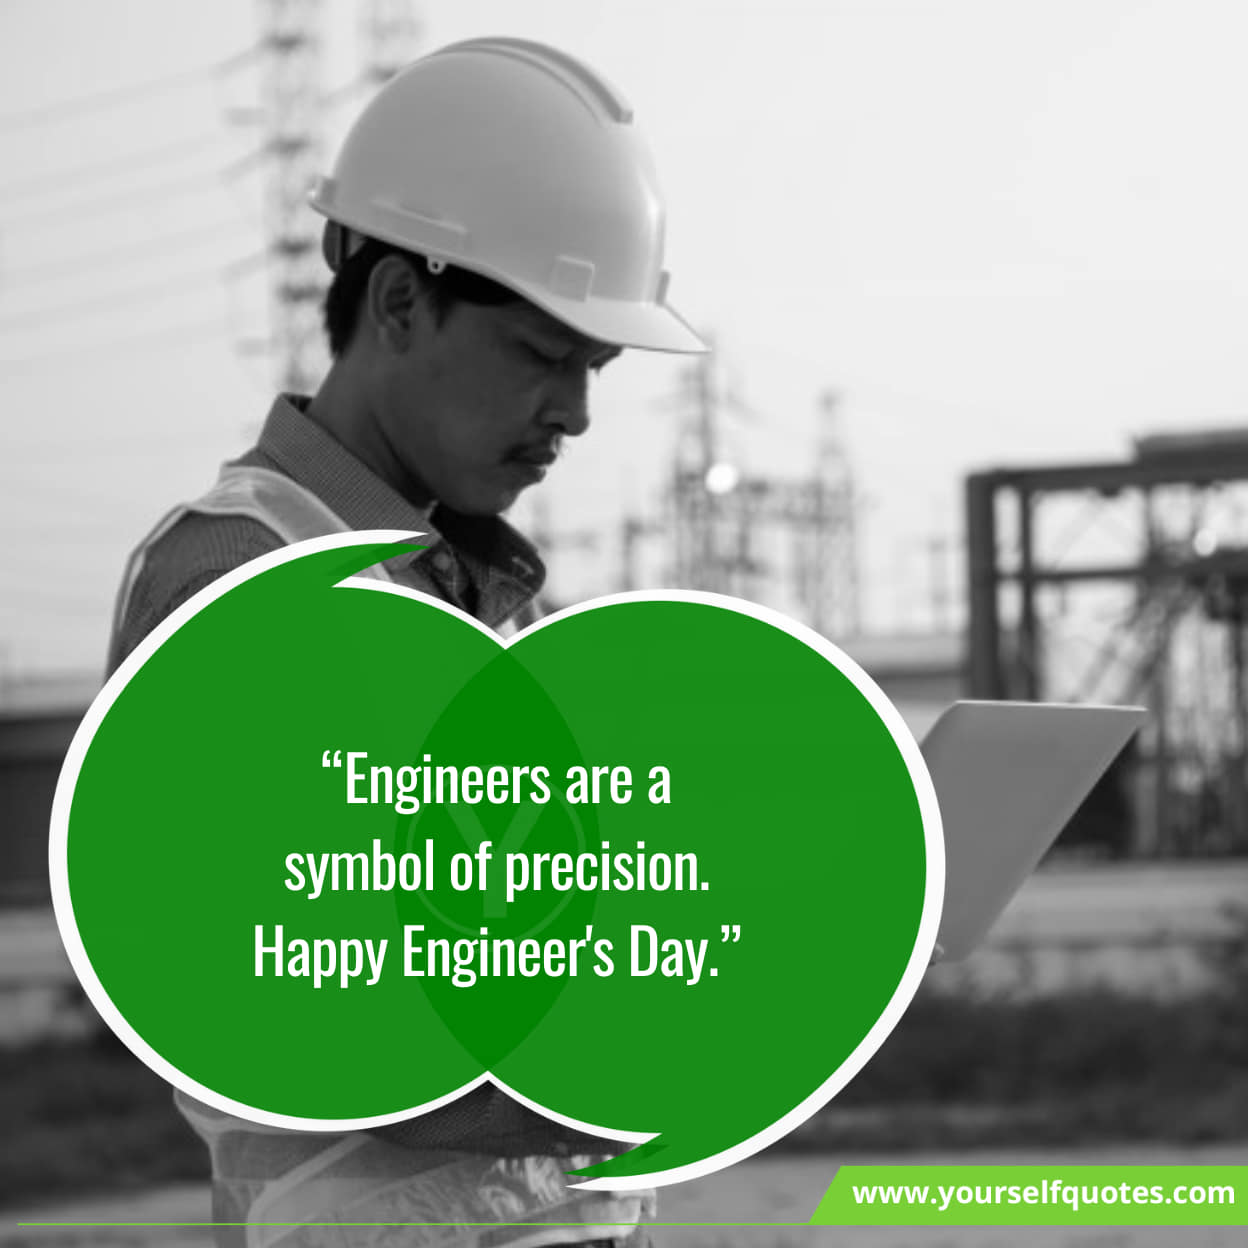 Happy Engineers Day Wishes